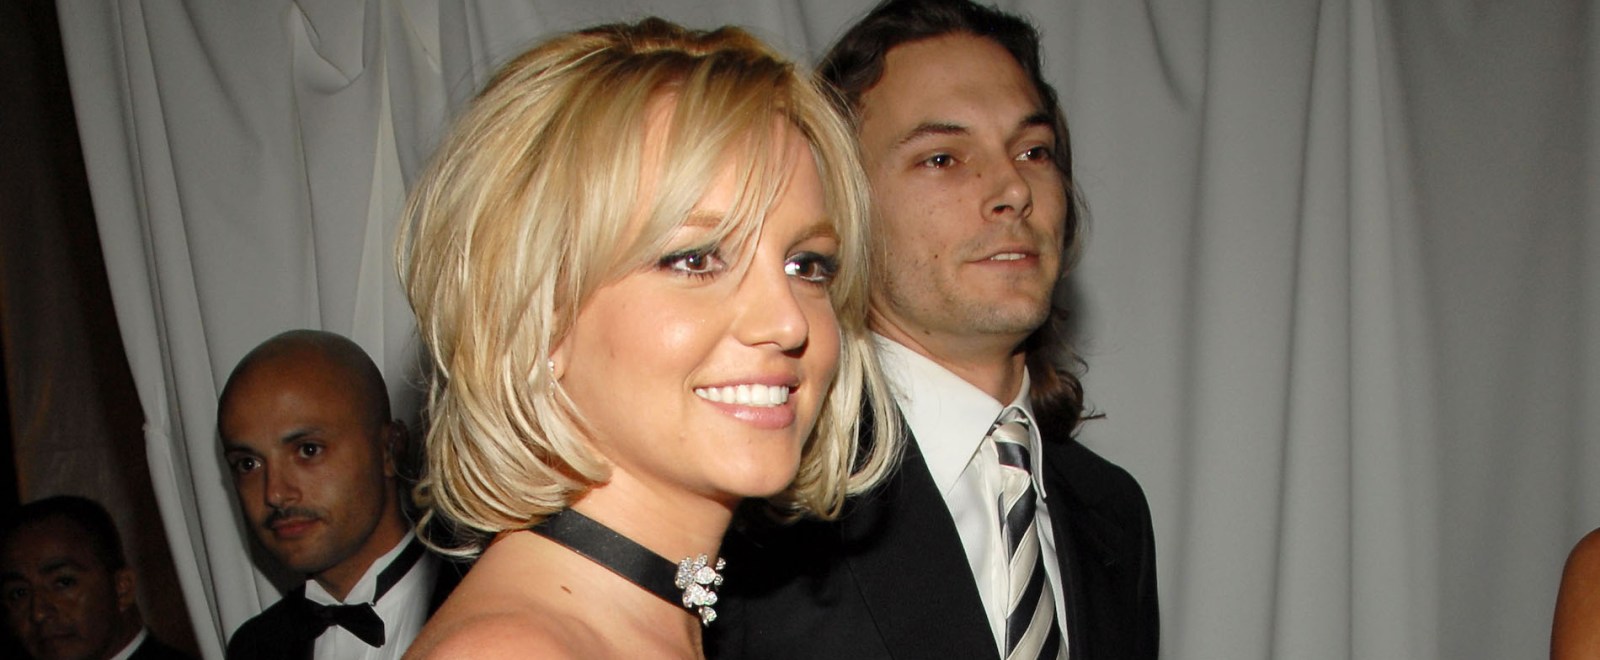 Britney Spears Kevin Federline 12th Annual Screen Actors Guild Awards Official After Party 2006